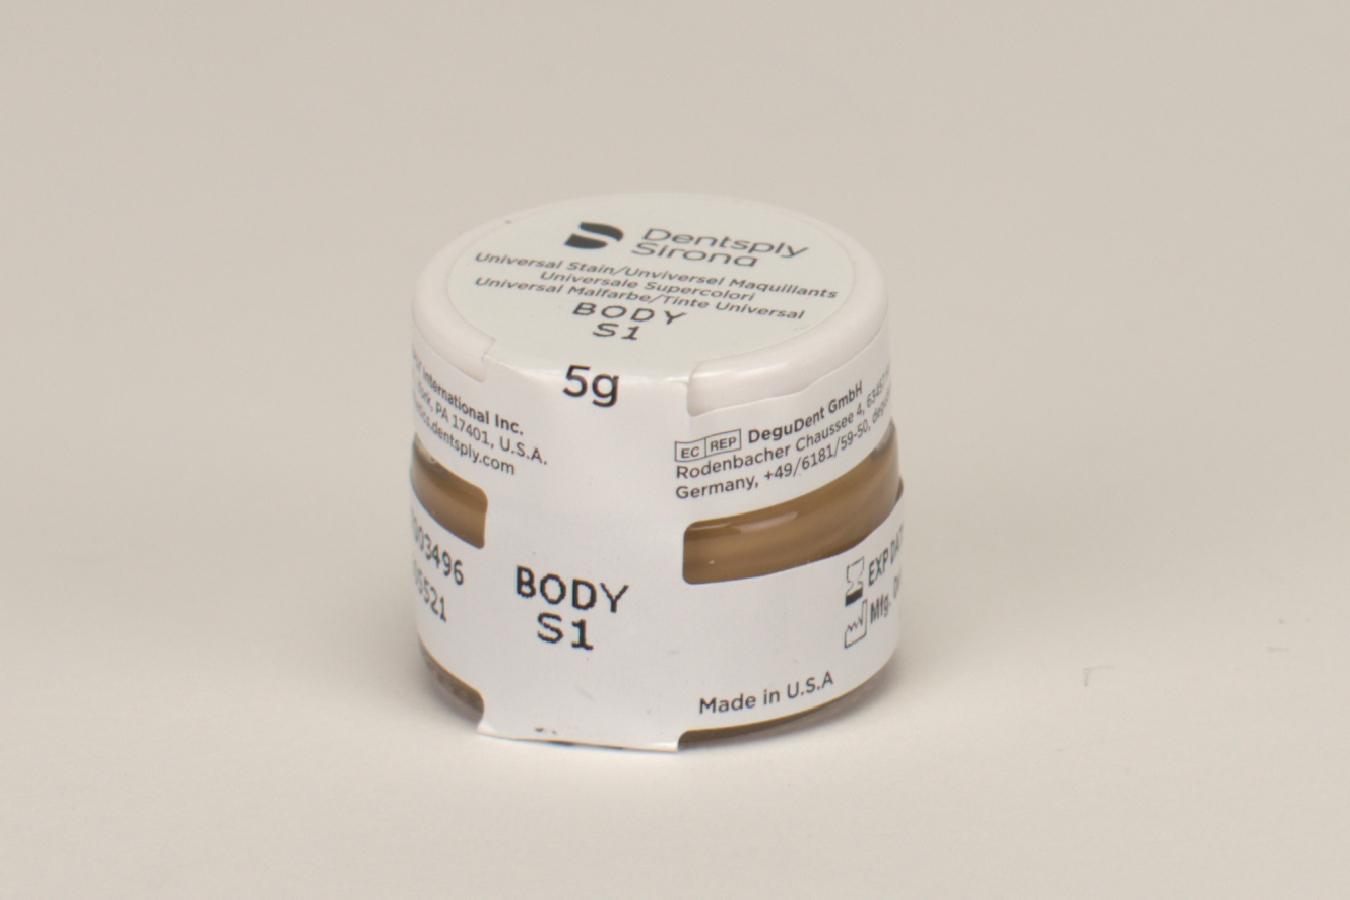 DS Universal Body Stain - S1 5G